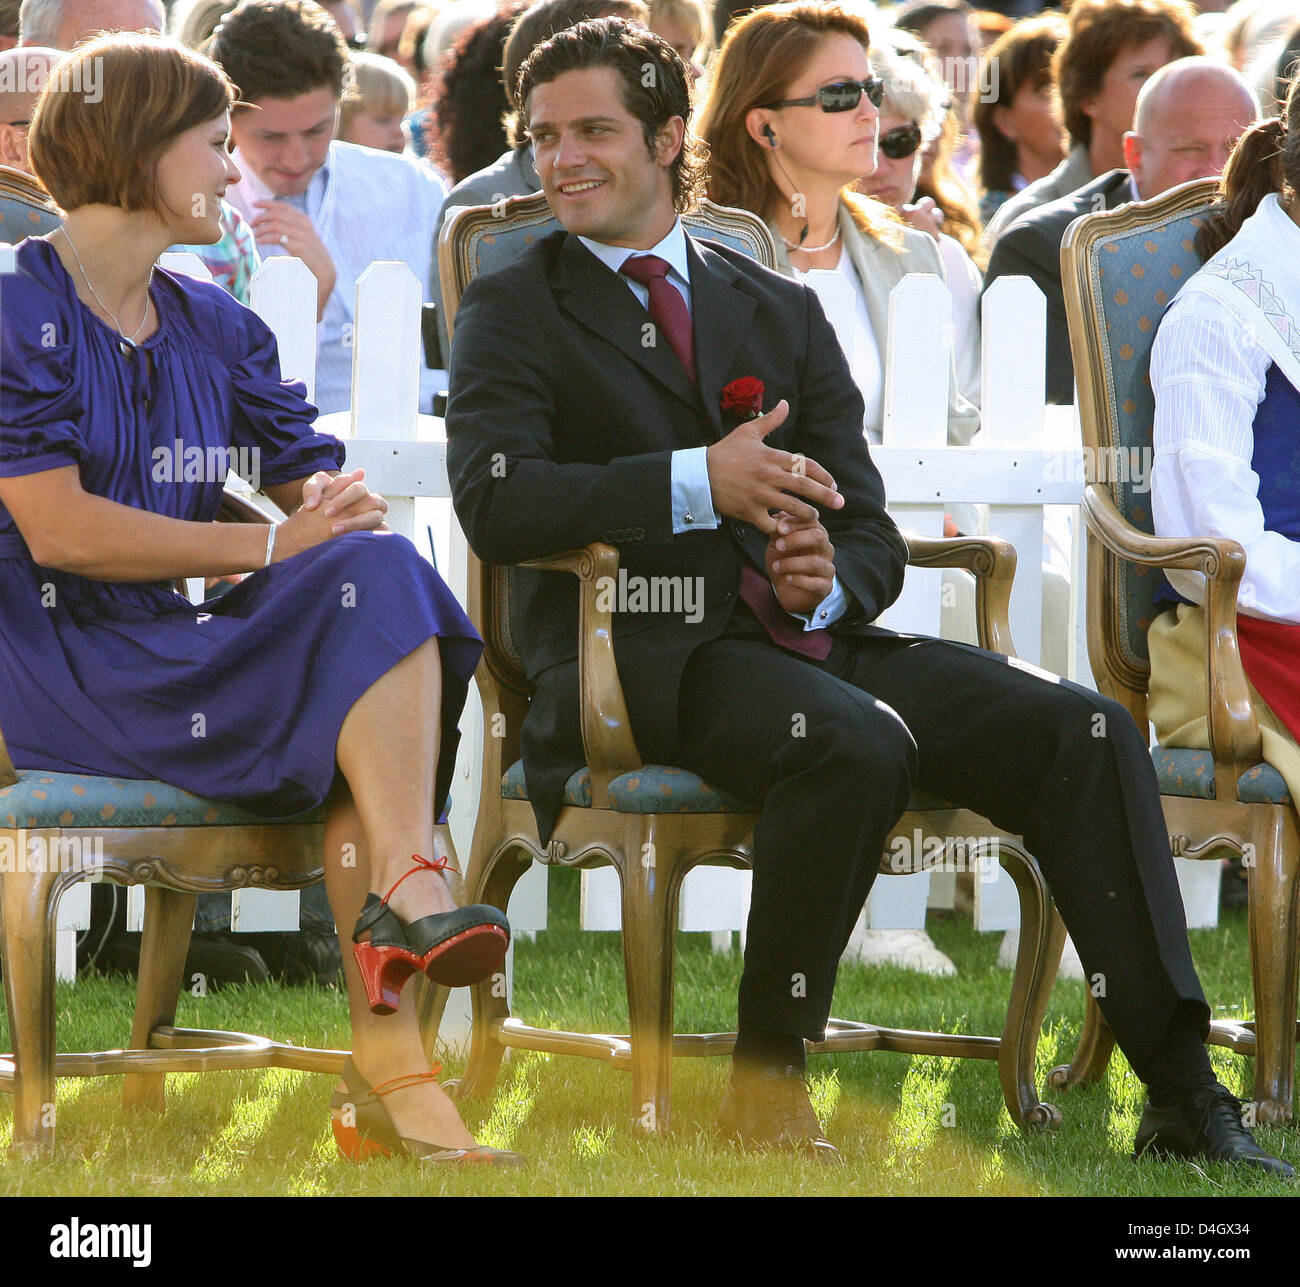 Prince Carl Philip of Sweden (C) is pictured while celebrating the 31th birthday of his sister Crown Princess Victoria at the sports arena in Borgholm, Sweden, 14 July 2008. Photo: Albert Philip van der Werf (Attention: NETHERLANDS OUT!) Stock Photo